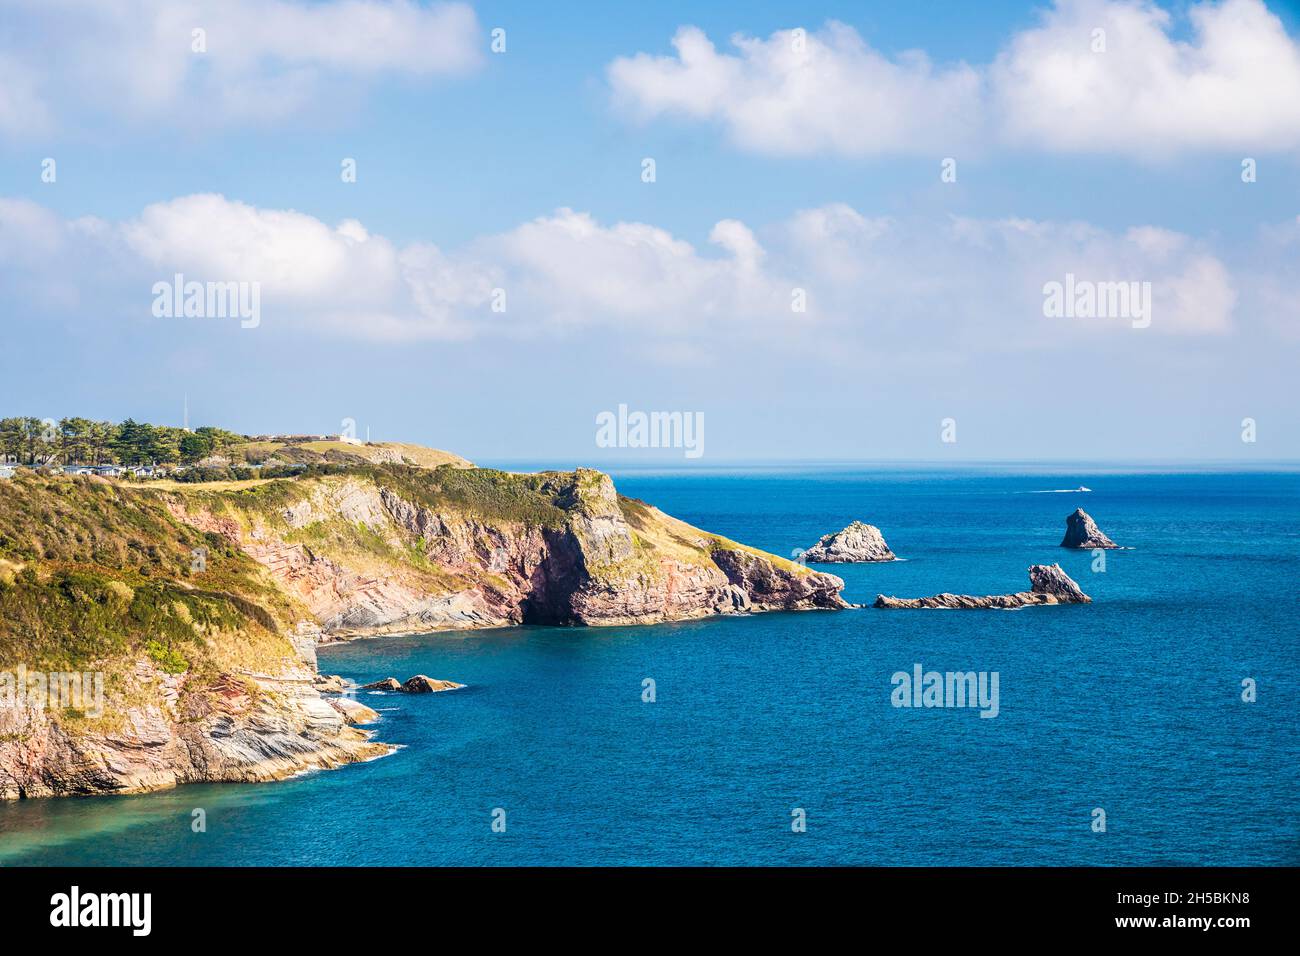 View towards St. Mary's Bay, Darl Head and Berry Head near Brixham in Devon from the South West Coast Path with the Darl Rock, Mew Stone and Cod Rock Stock Photo